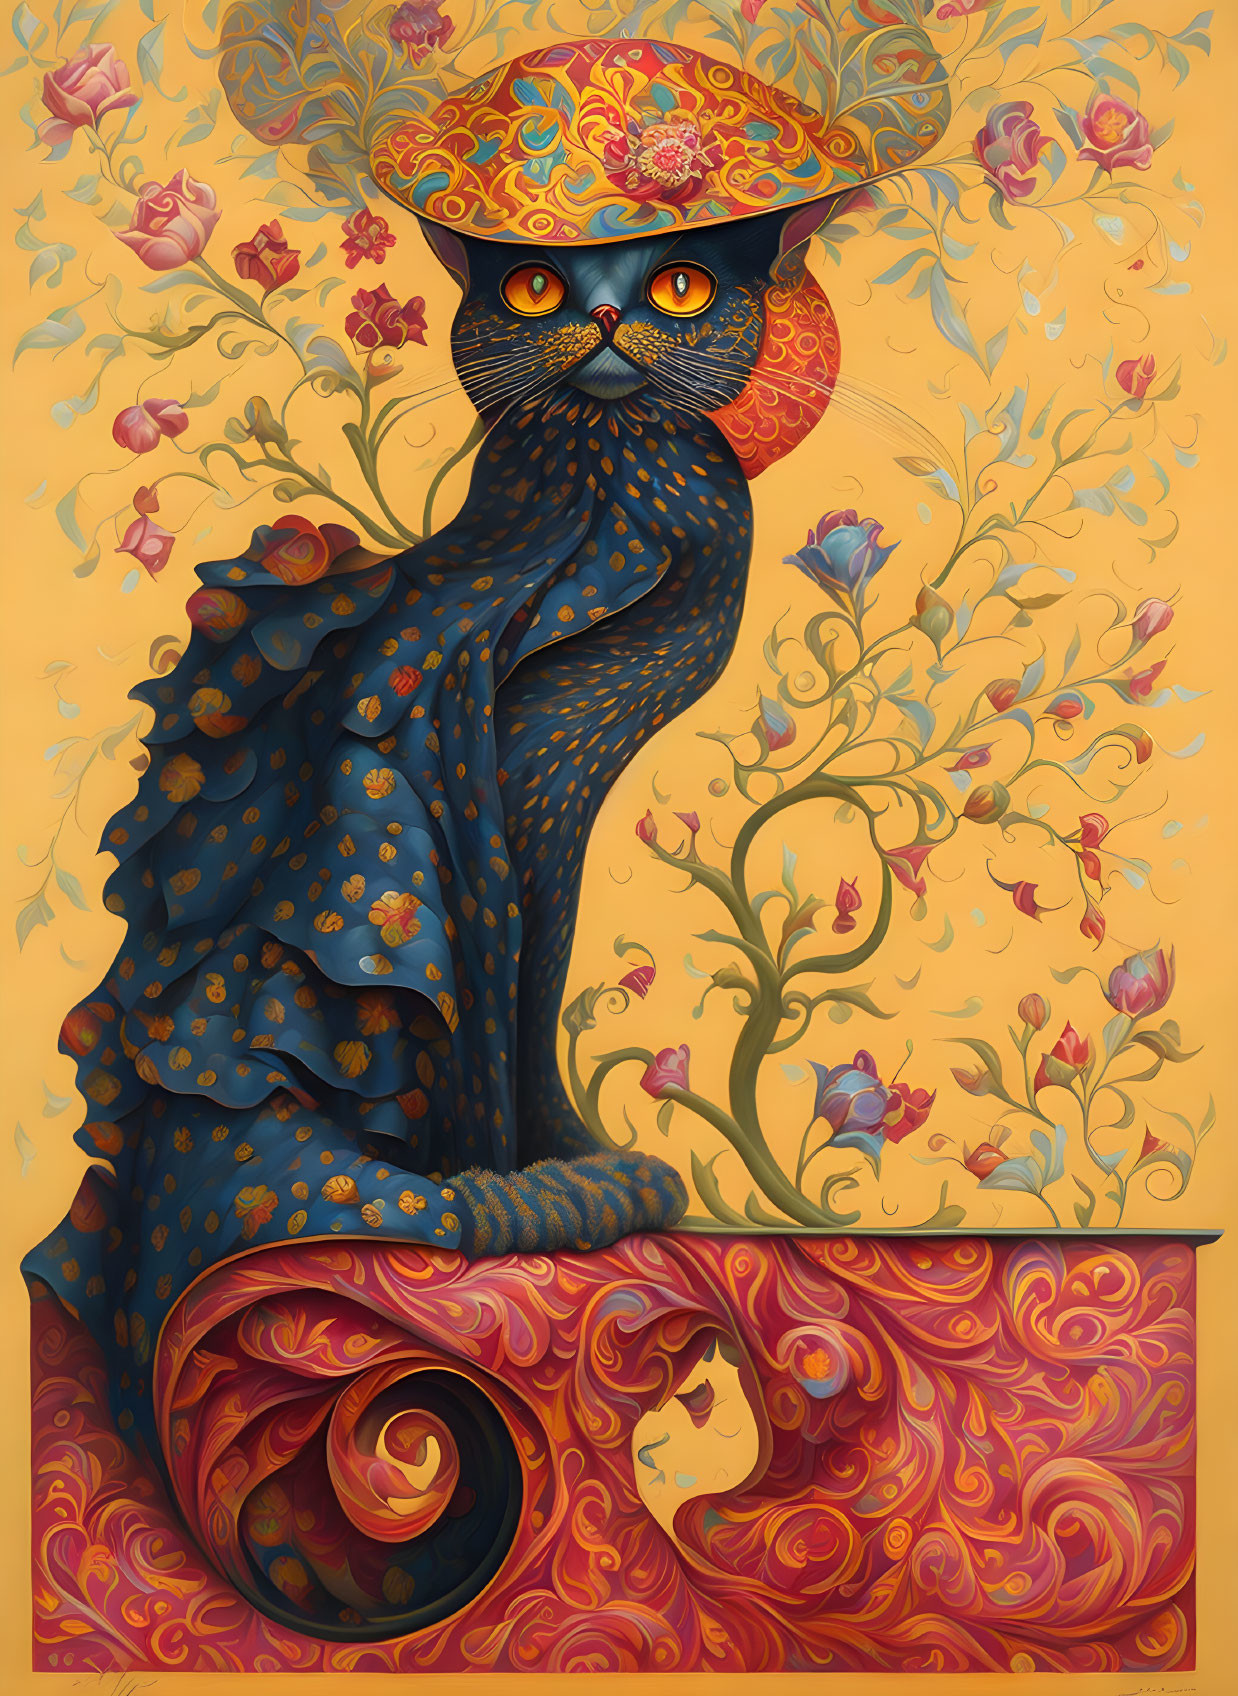 Illustrated cat with intense orange eyes in richly decorated hat on floral golden background